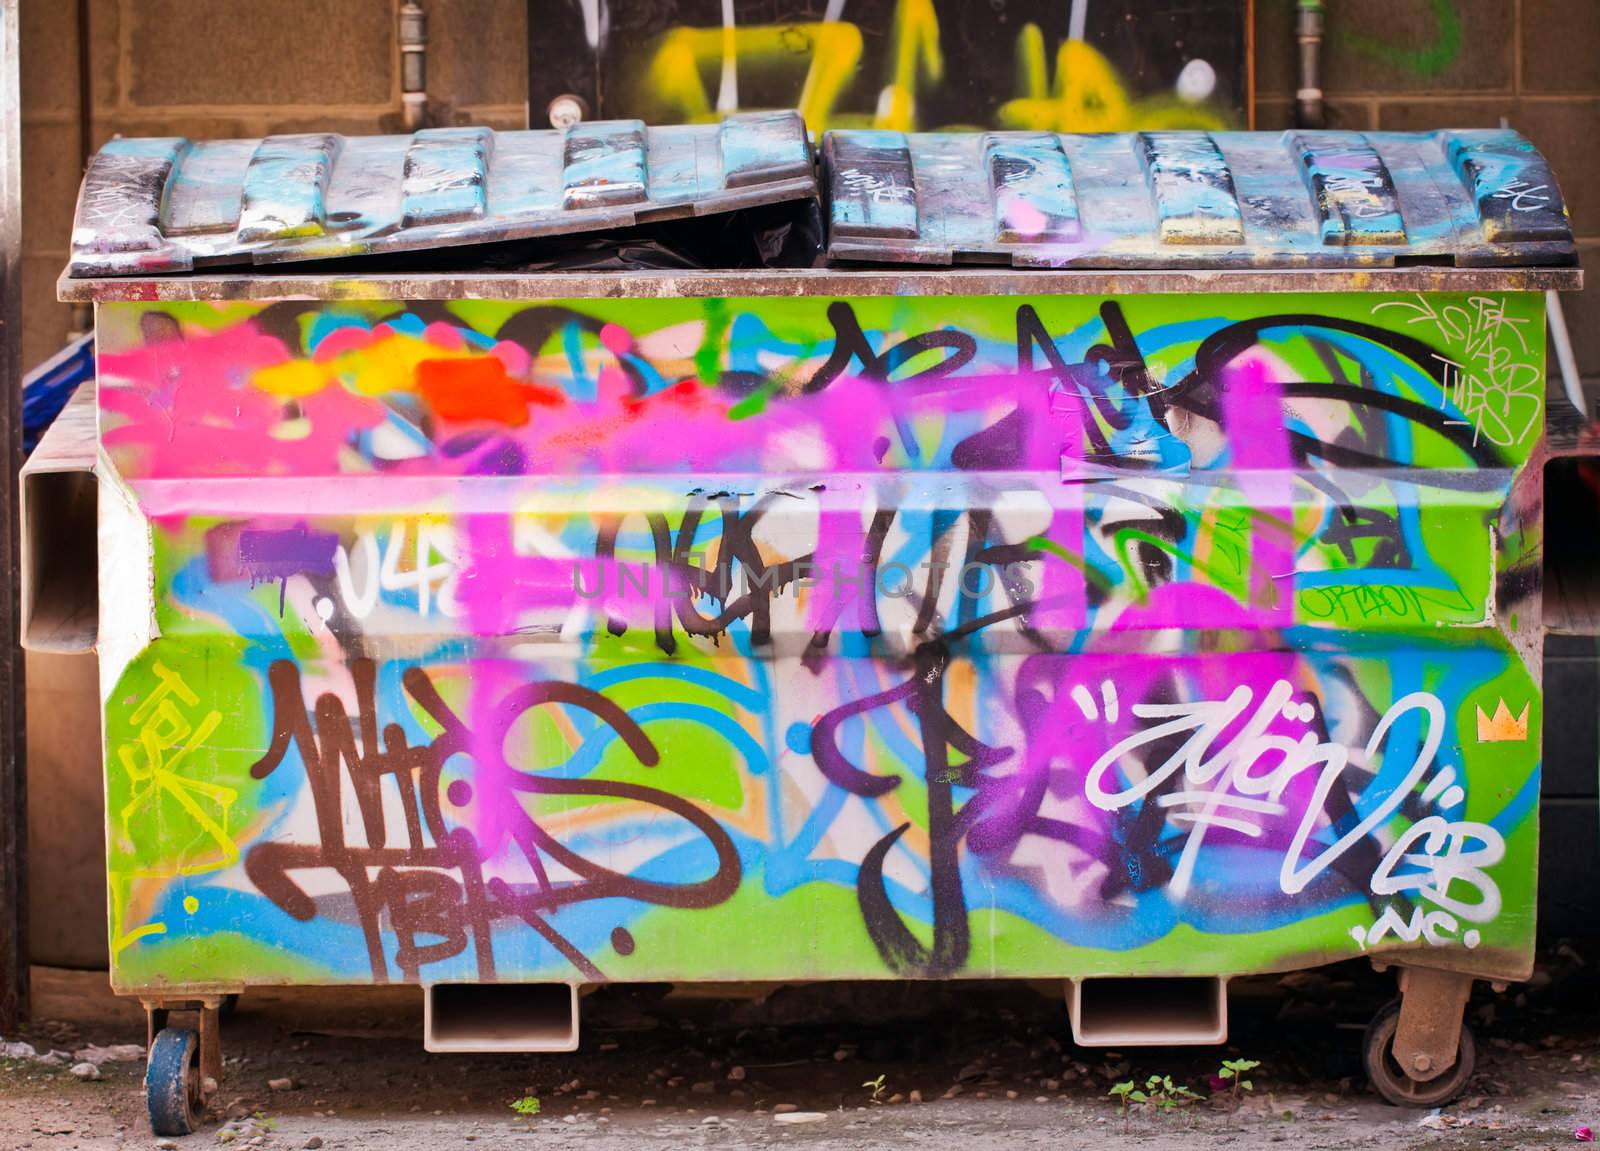 A rubbish bin or dumpster full of trash and covered in graffiti by Jaykayl